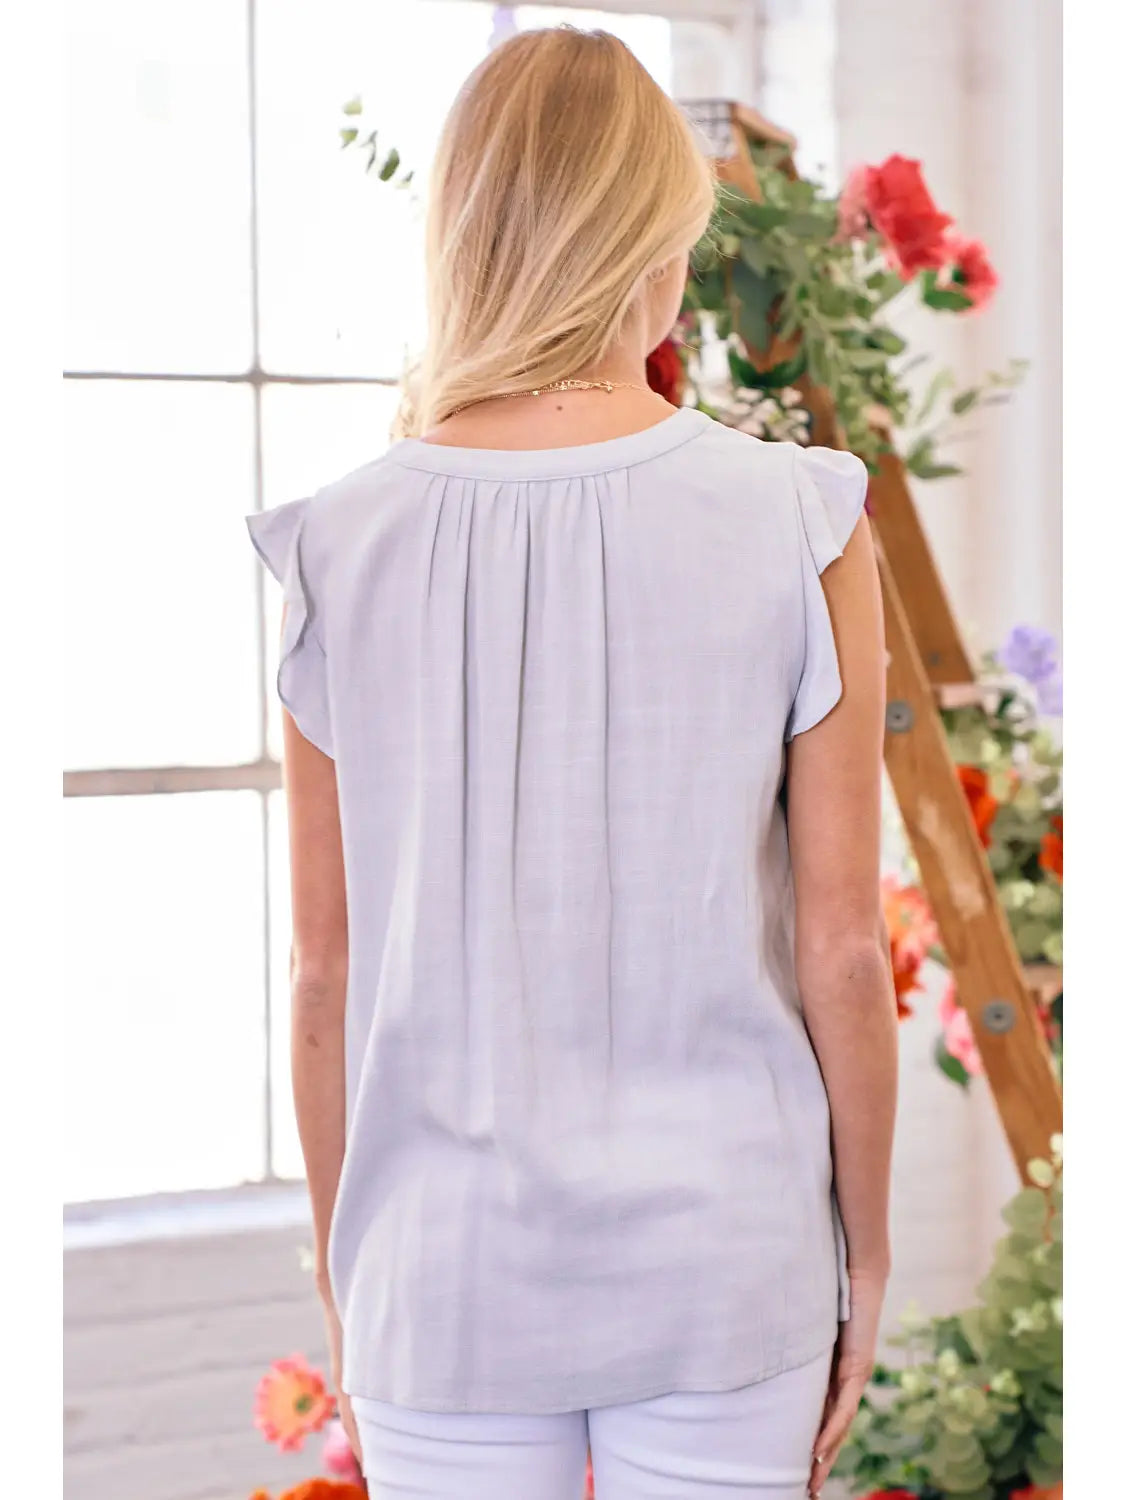 The Audra Top